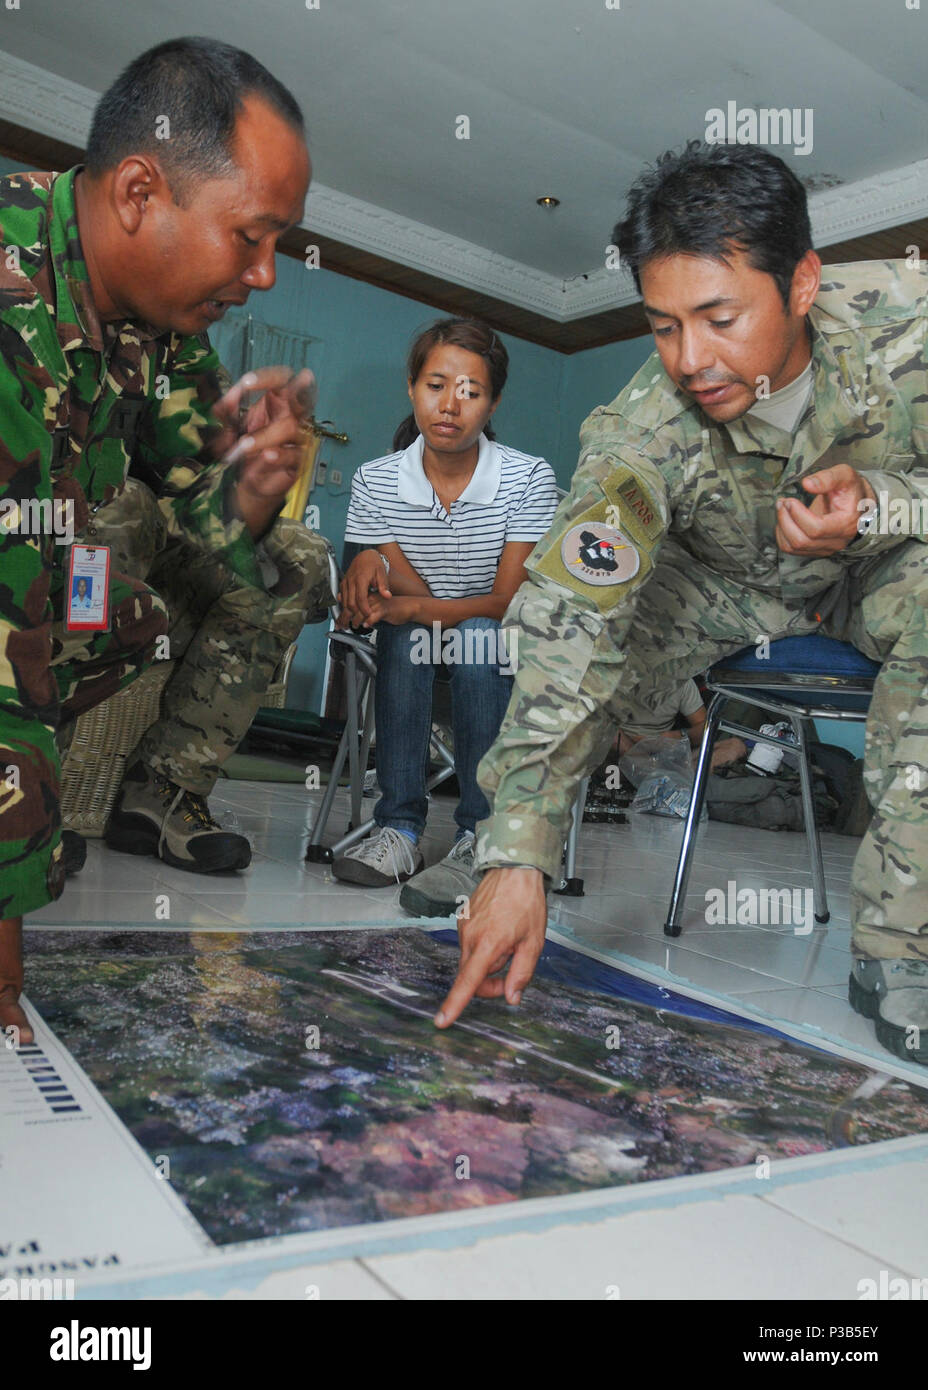 U.S. Air Force Staff Sgt. Christopher Lugo, right, assigned to the 353rd Special Operations Group, points out damaged aviation navigation aids during a meeting with Indonesian airmen at Ta Bing Air Field in Padang, Indonesia, Oct. 7, 2009. The service members are meeting to discuss the restoration of the aids to better facilitate flight operations in support of ongoing humanitarian relief efforts in Padang. The U.S. military is responding to a request for assistance by the Indonesian government after a 7.6 magnitude earthquake struck the country Sept. 30, 2009. (DoD Stock Photo